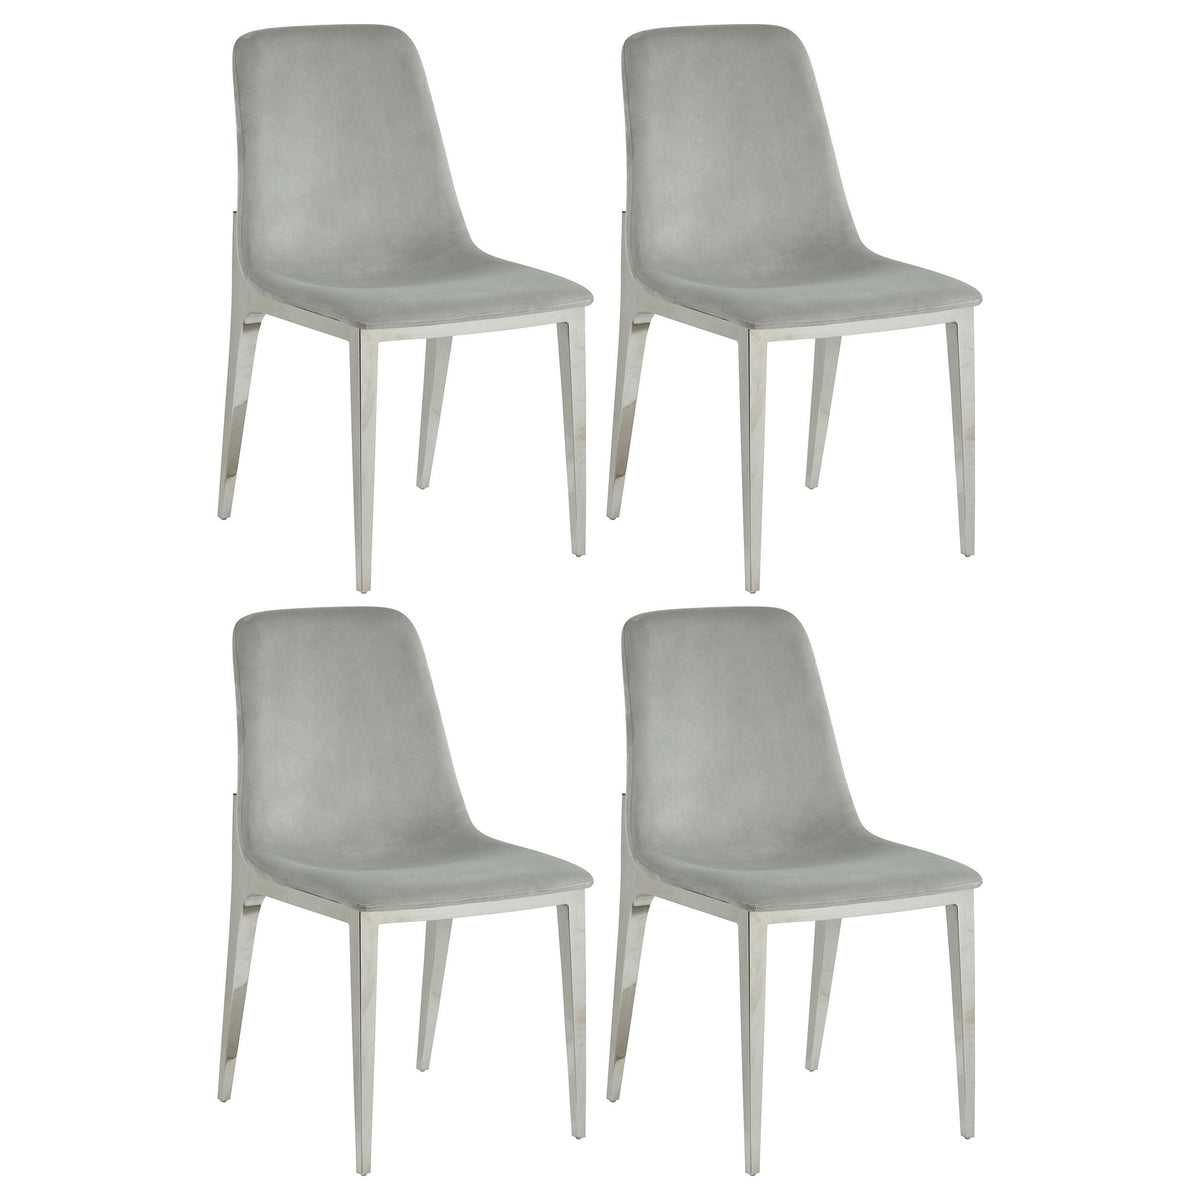 Irene Upholstered Side Chairs Light Grey and Chrome (Set of 4) Irene Upholstered Side Chairs Light Grey and Chrome (Set of 4) Half Price Furniture